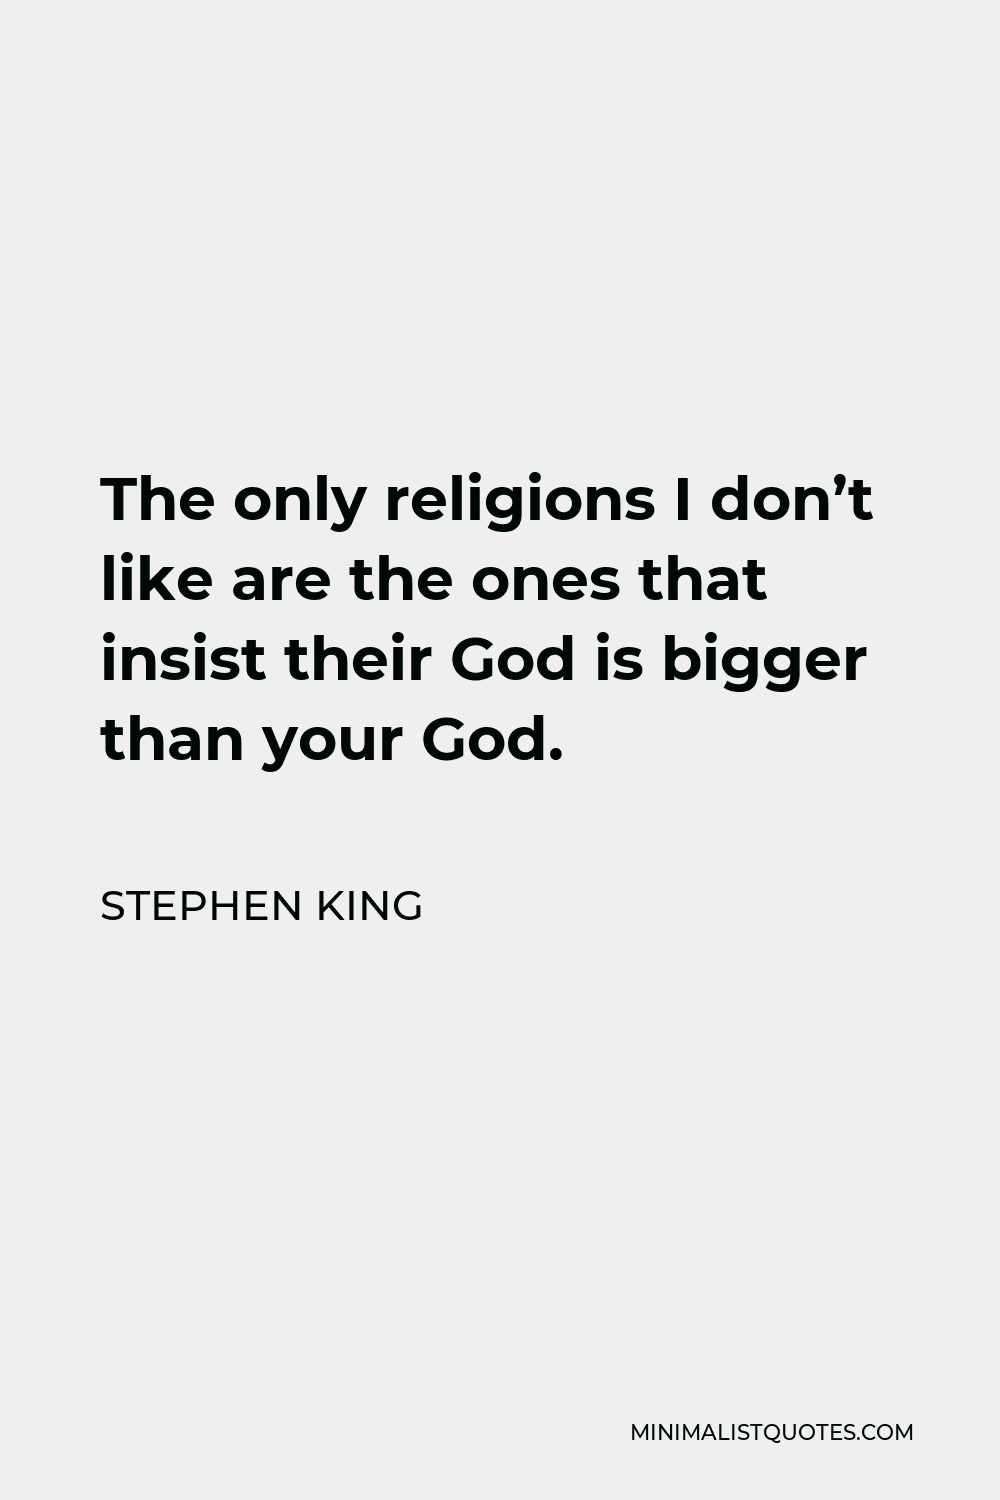 Stephen King Quote - The only religions I don’t like are the ones that insist their God is bigger than your God.